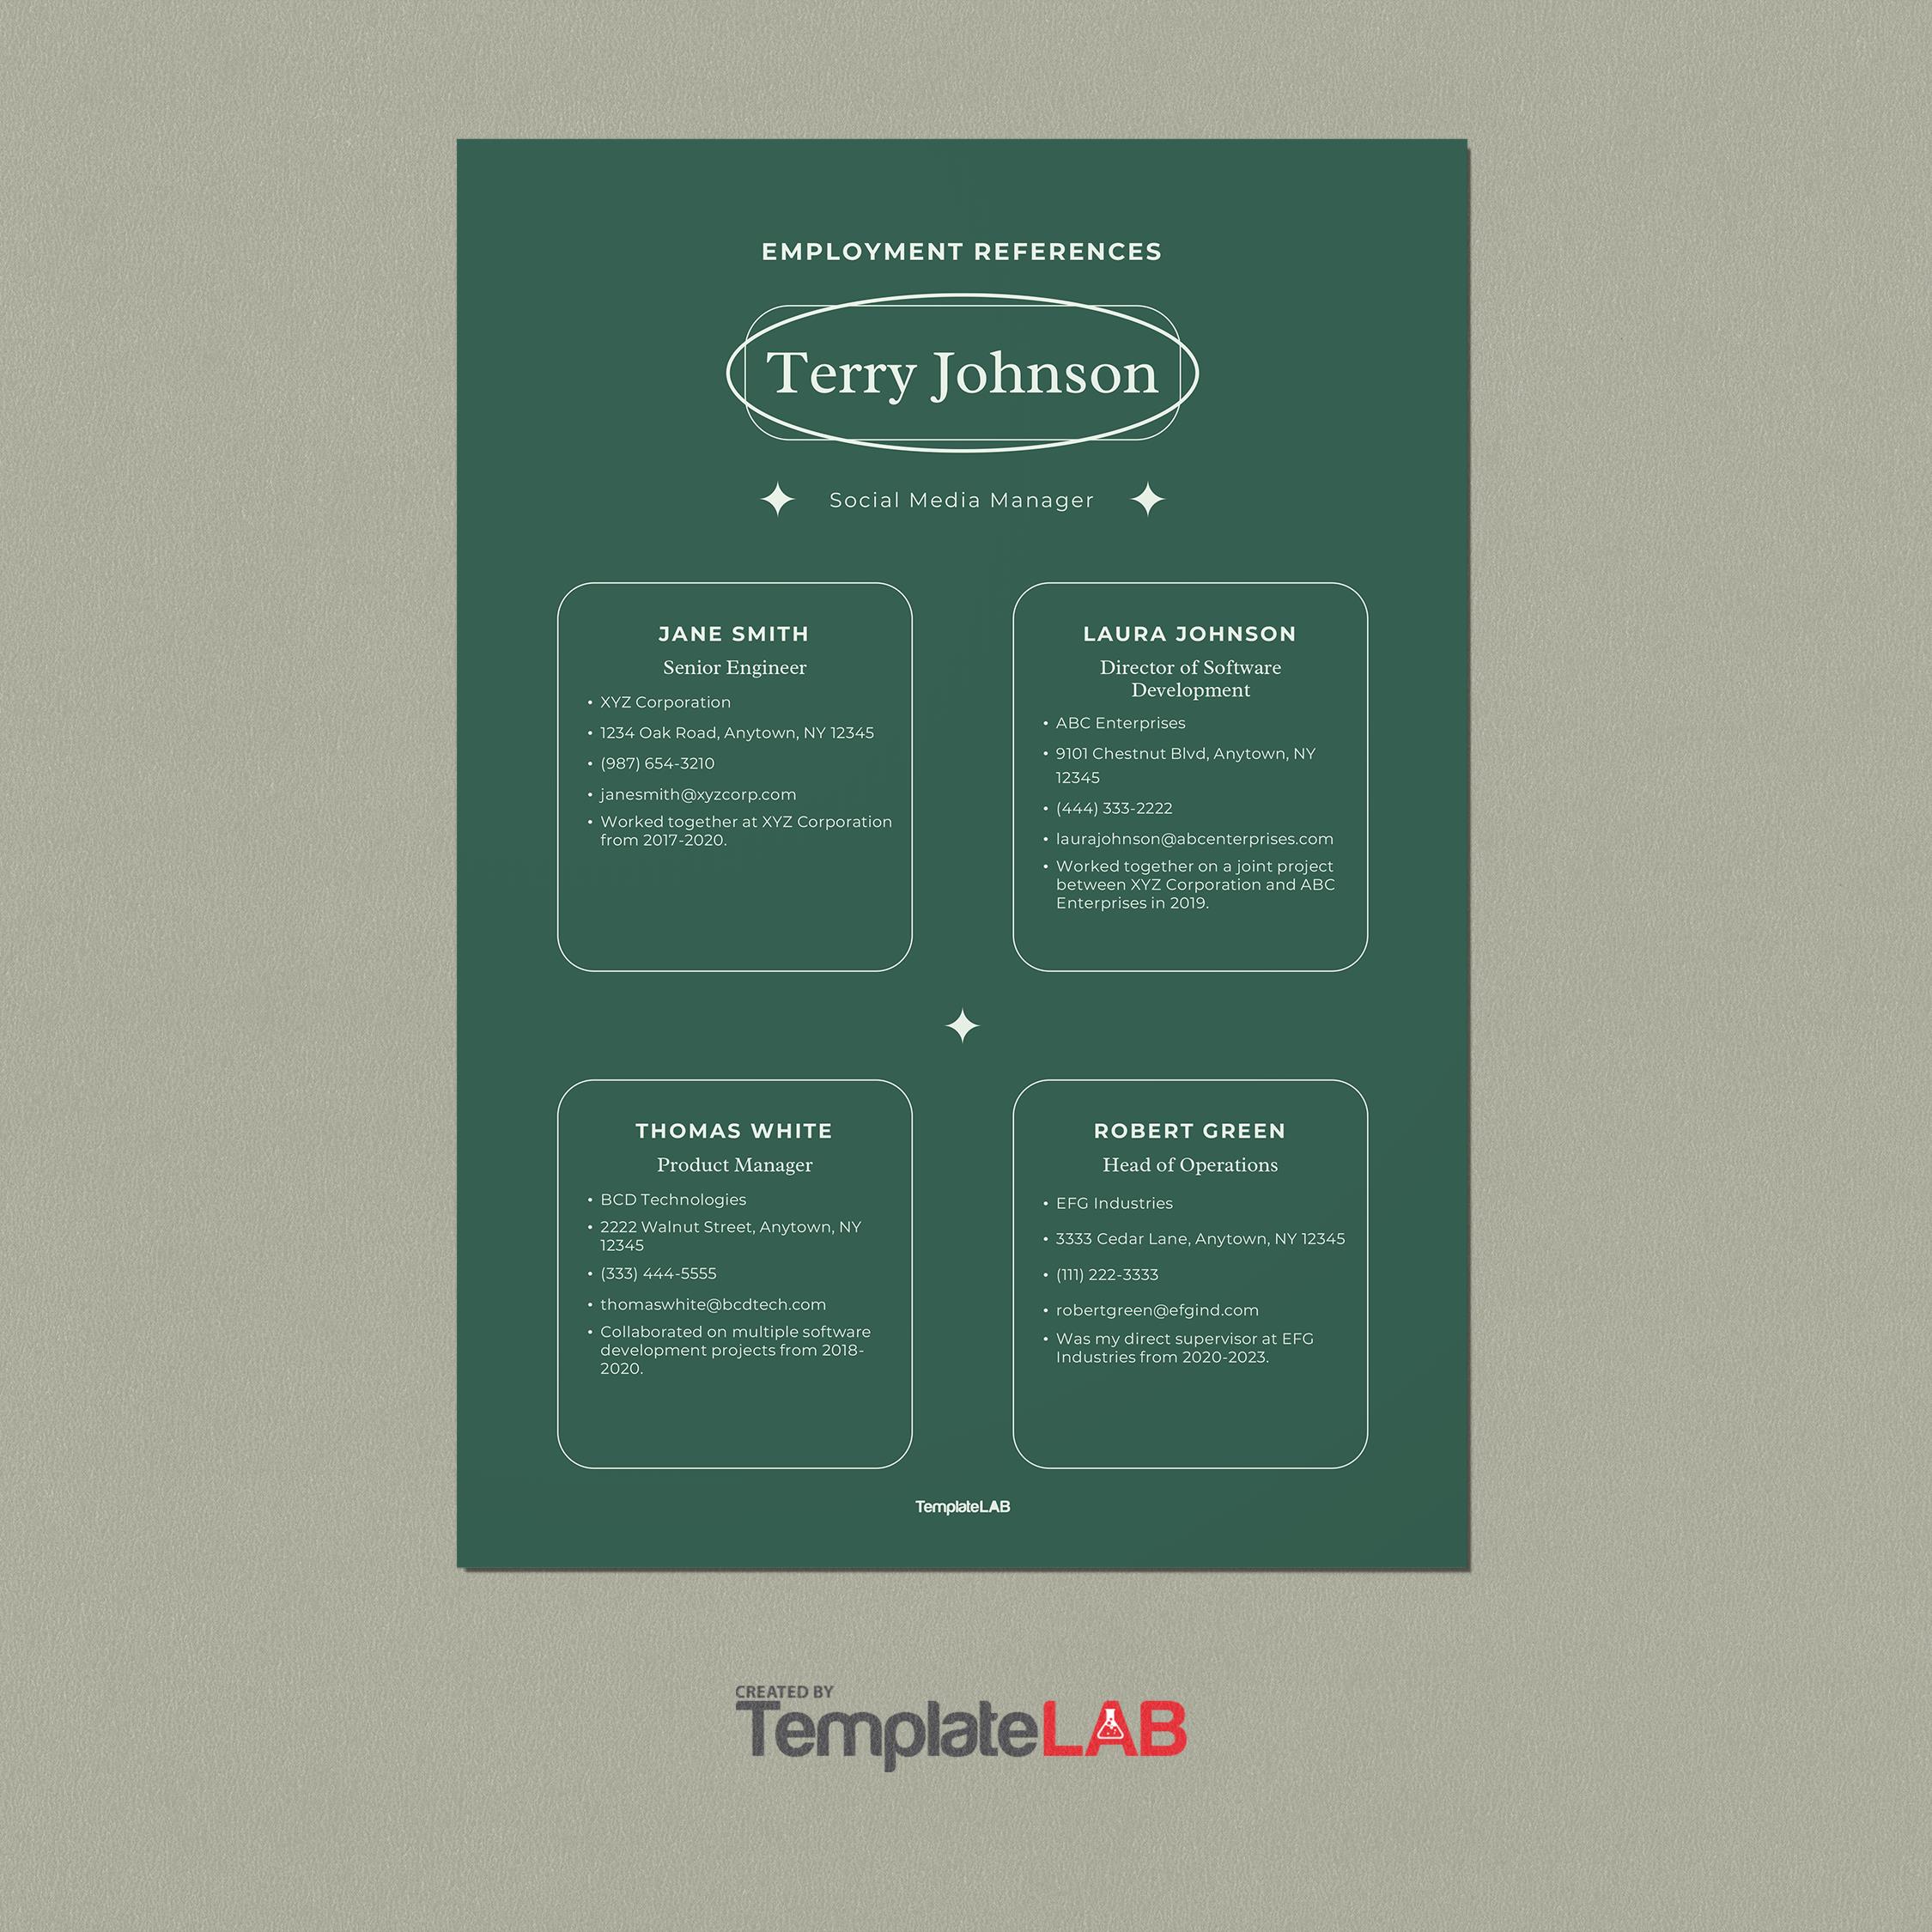 Free Employment References Template